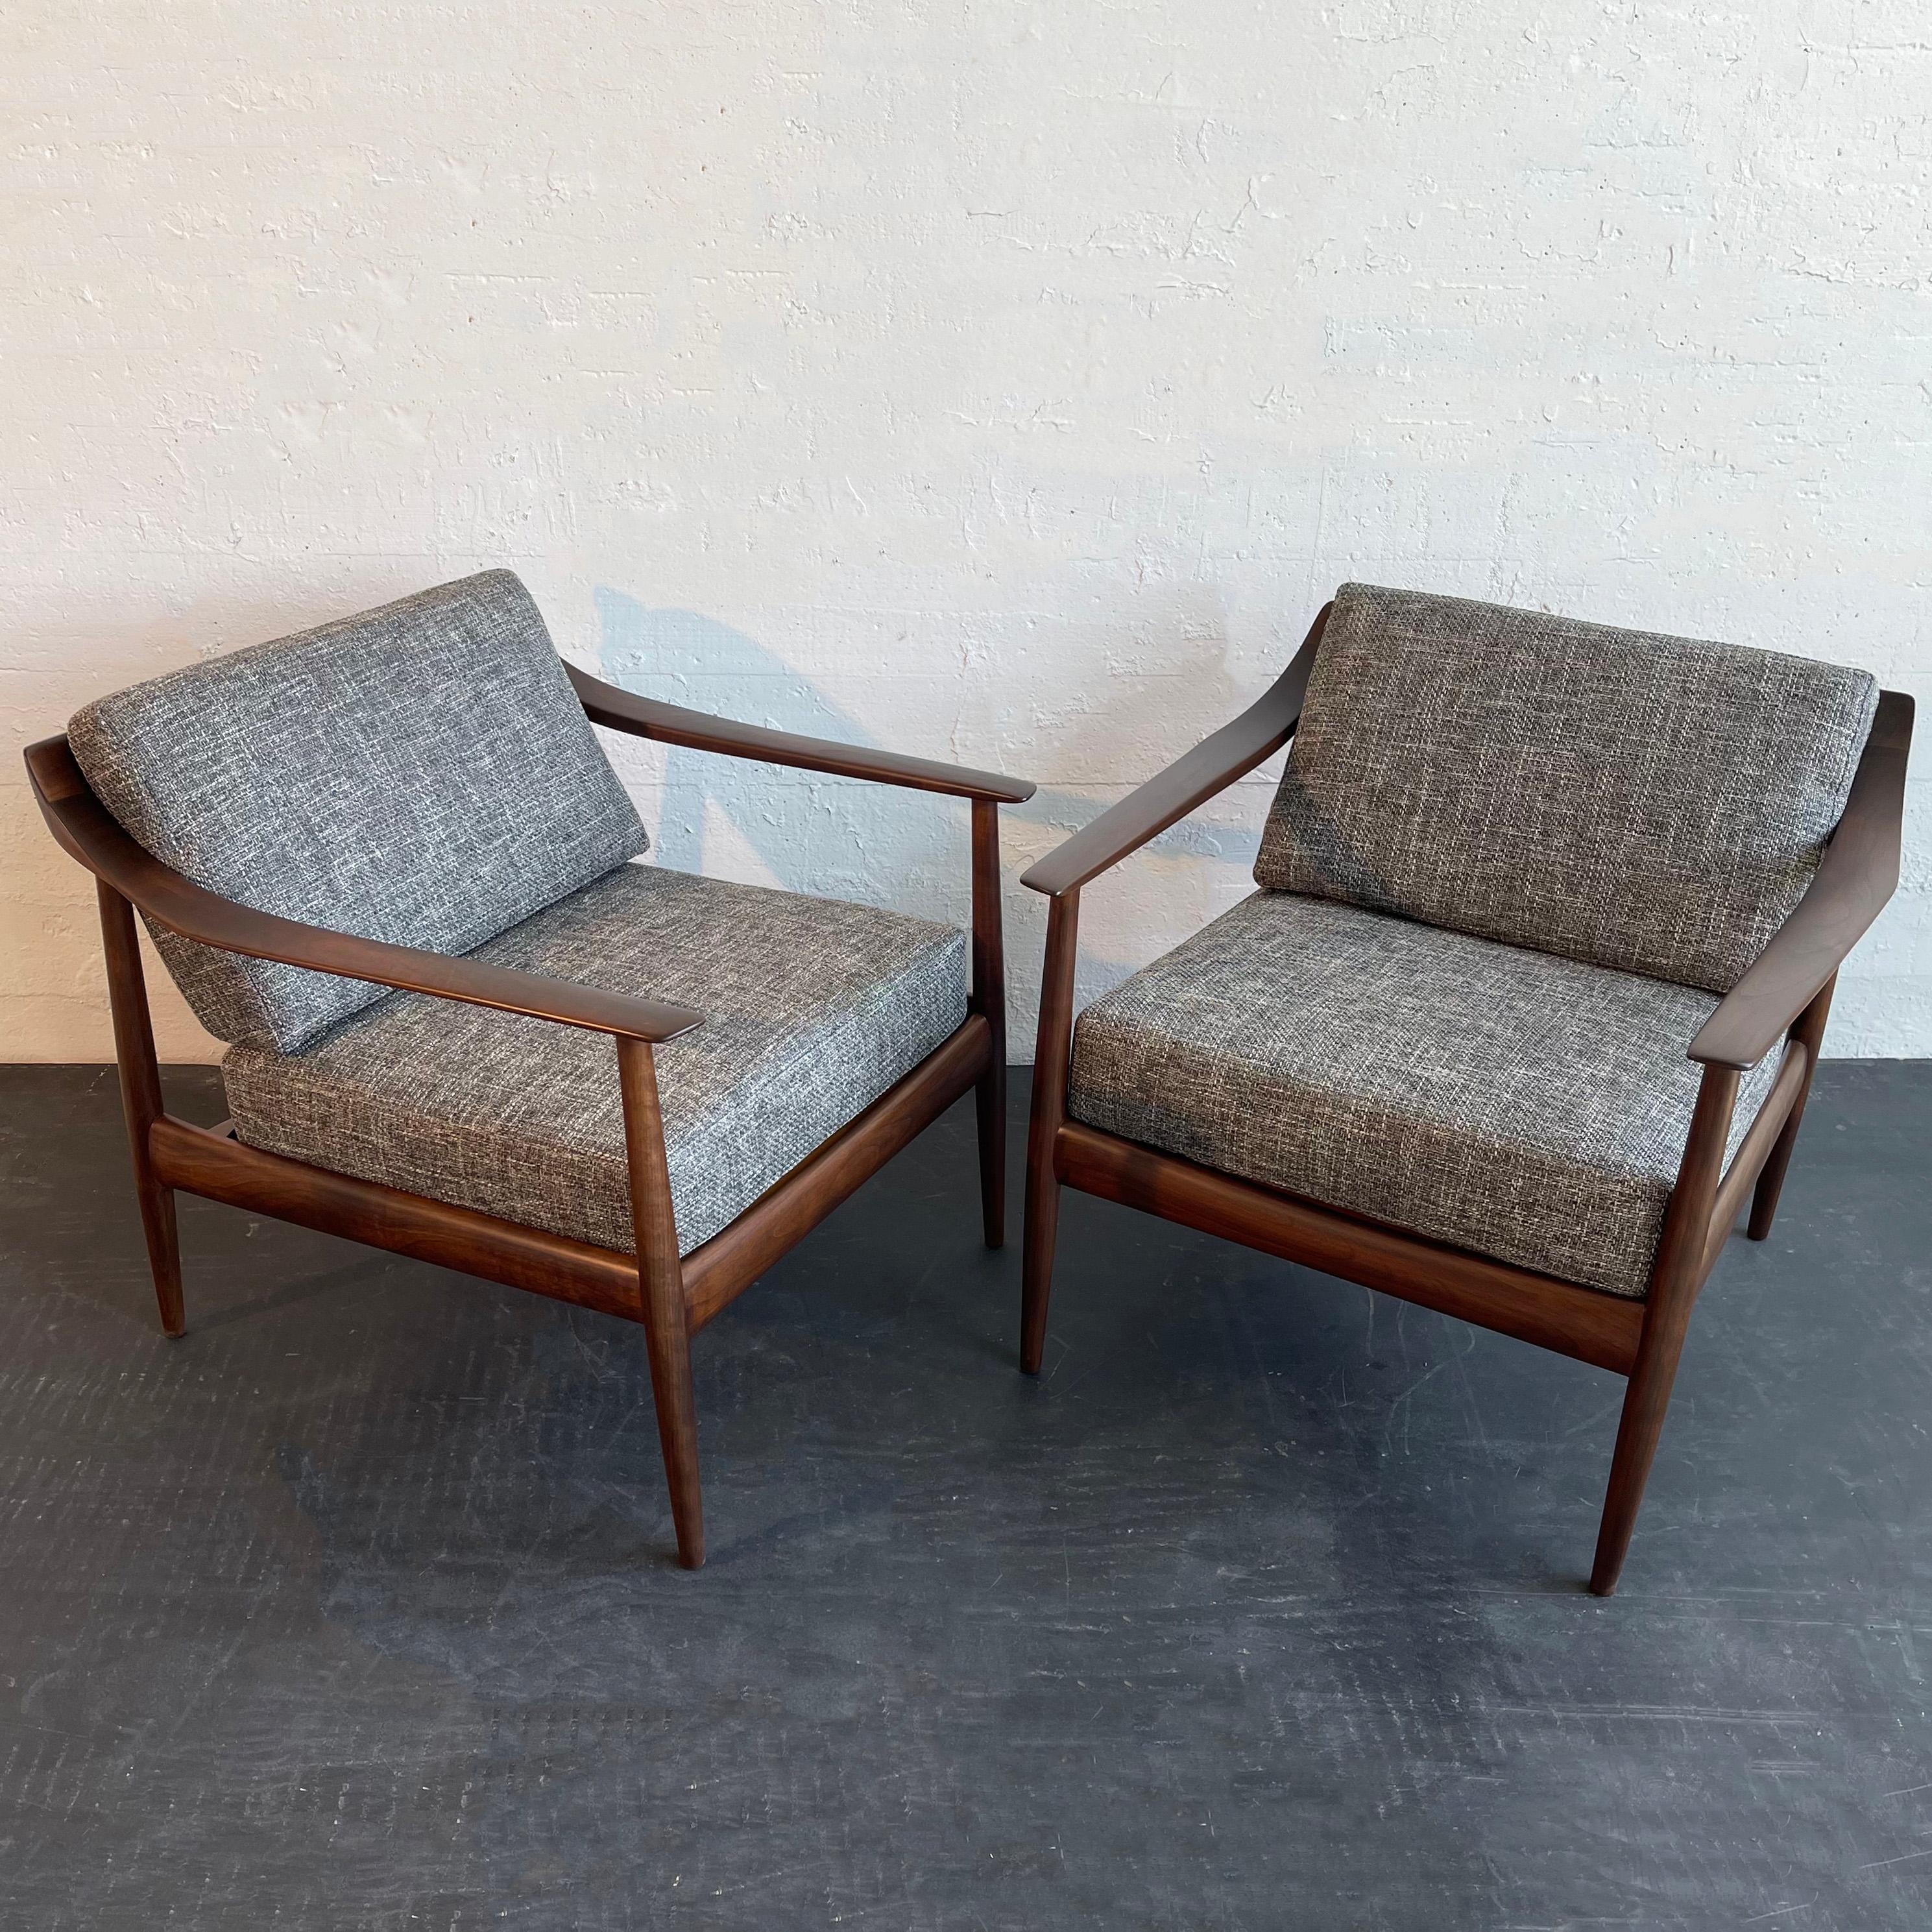 German Mid-Century Modern Walnut Lounge Chairs By Knoll Antimott For Sale